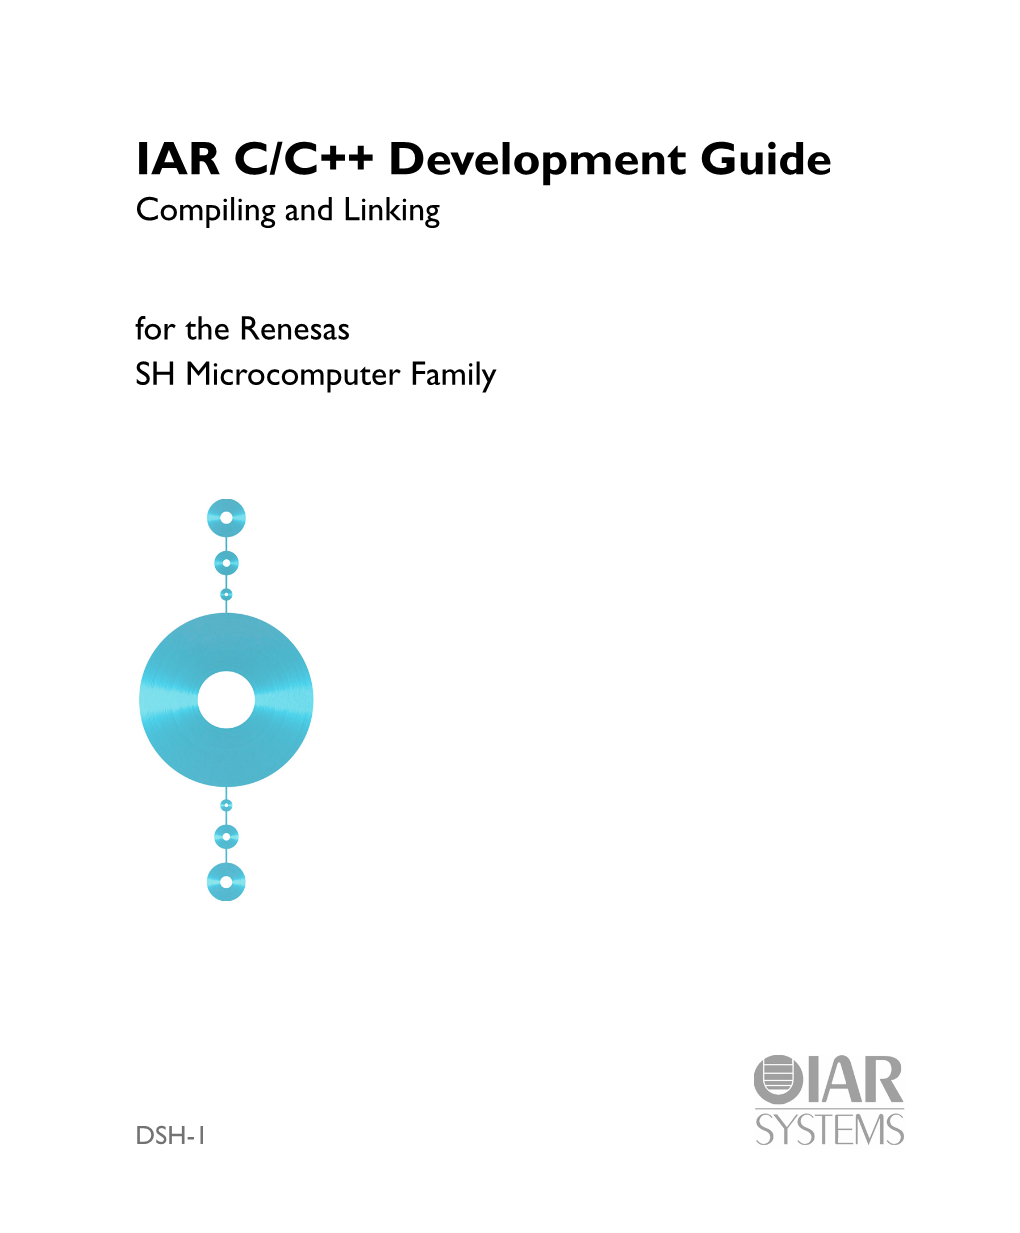 IAR C/C++ Development Guide Compiling and Linking for the Renesas SH Microcomputer Family